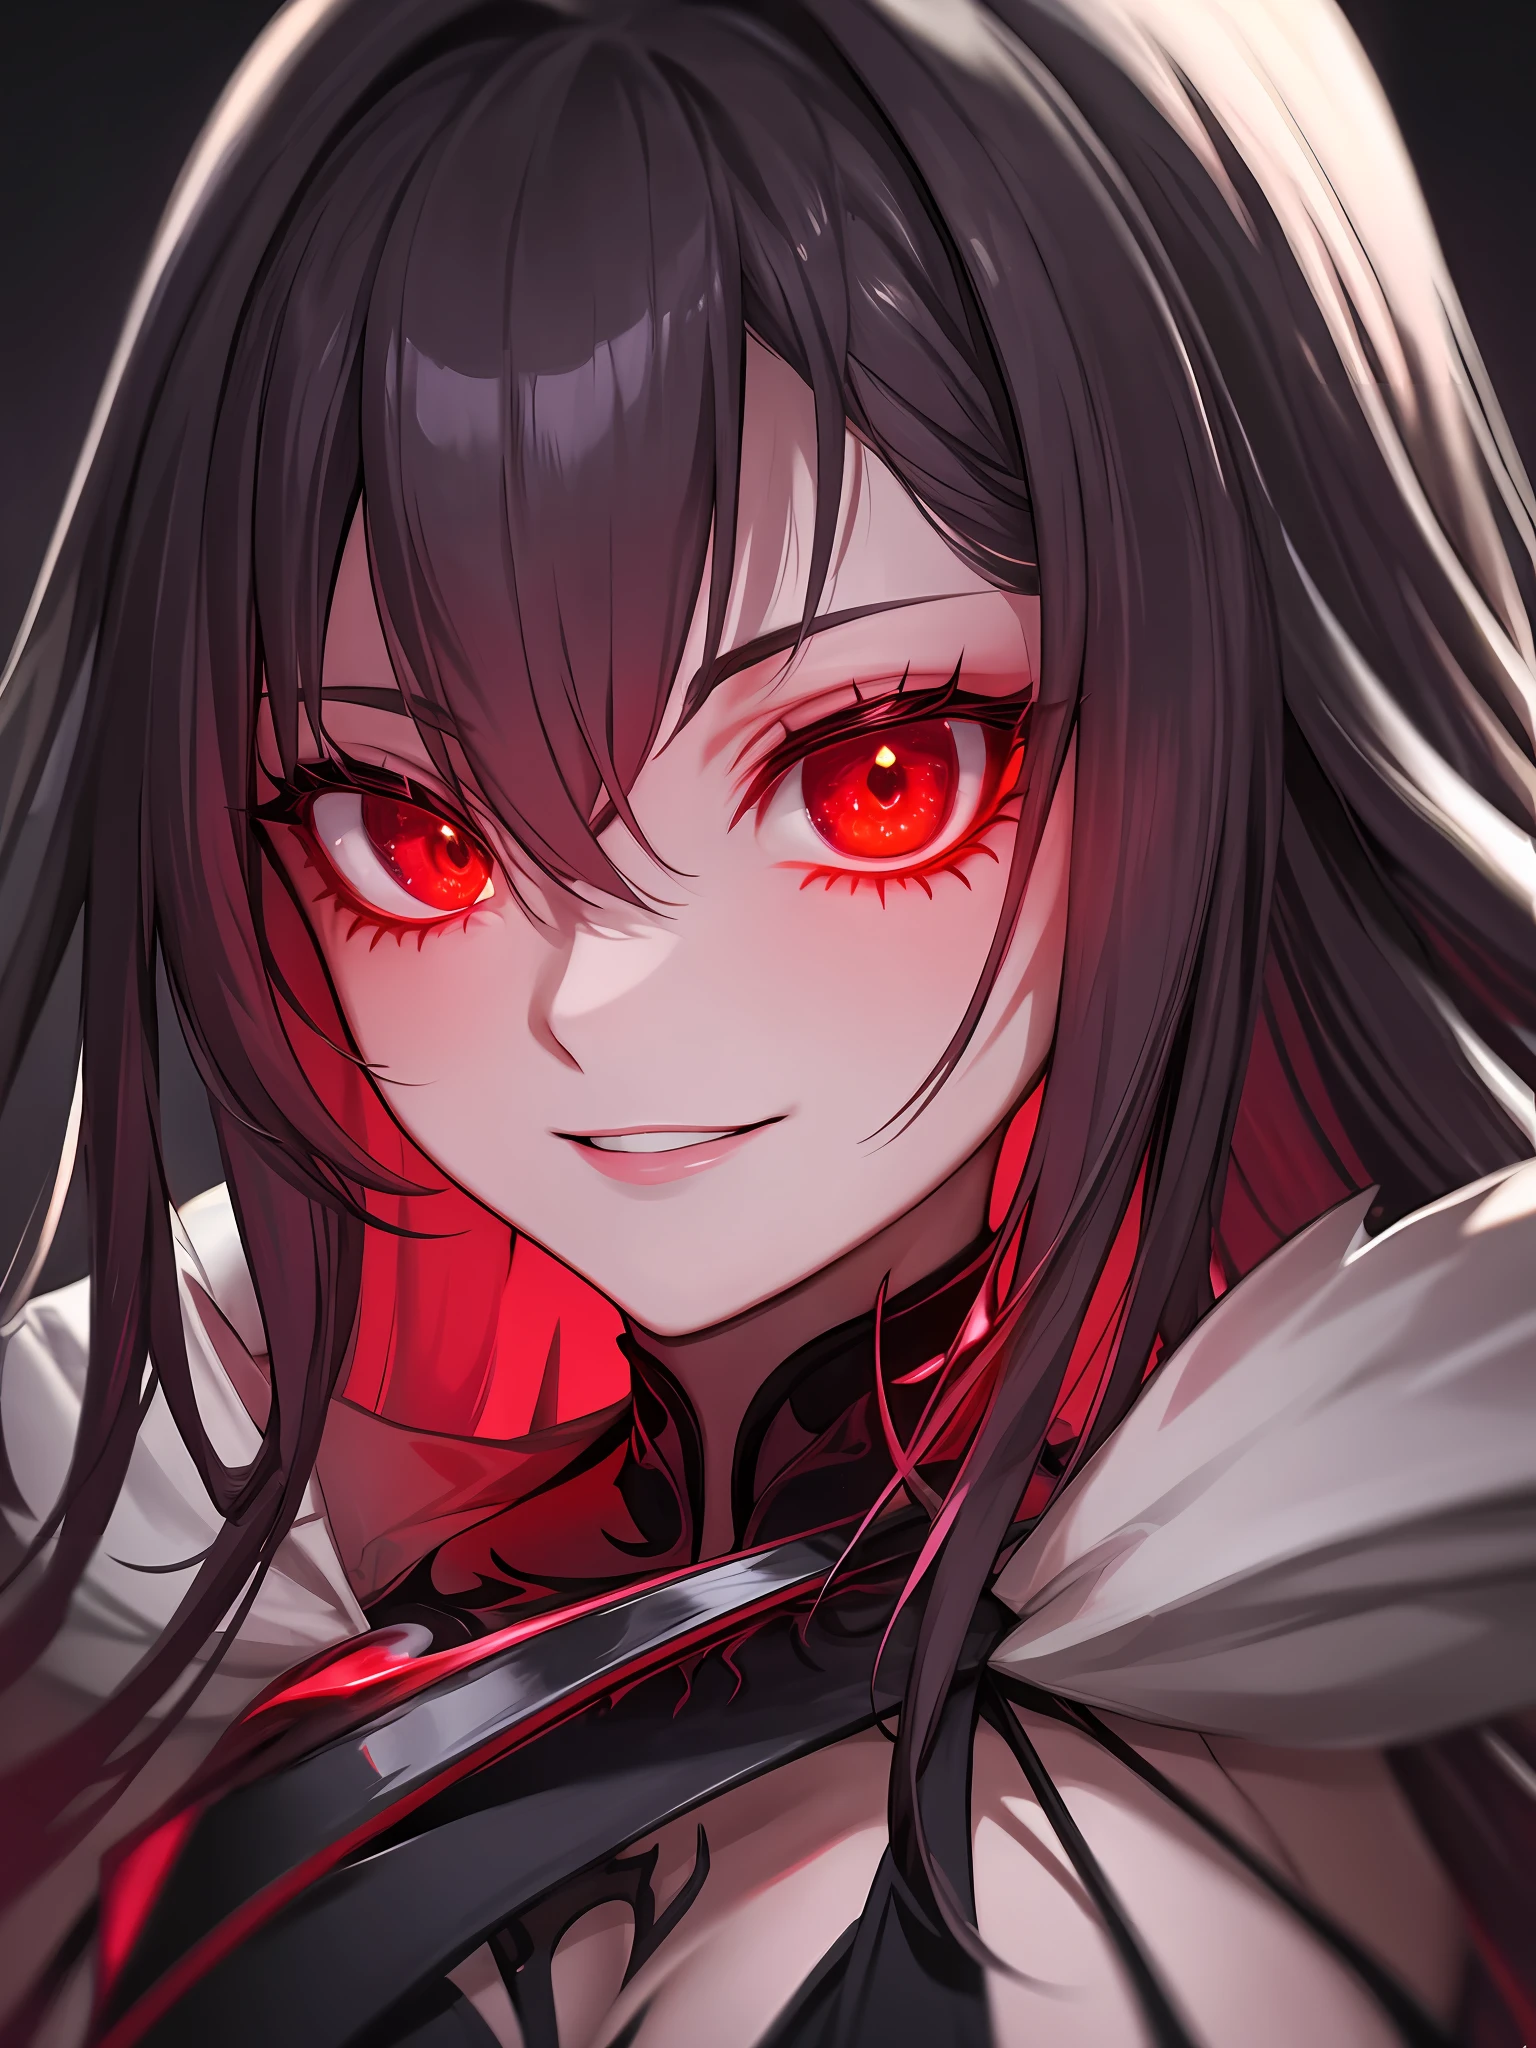 1lady , night hunter, glowing red eyes, night, mischivous smile, scary, close up
hard lighting, best quality, intricate, highly detailed, masterpiece,